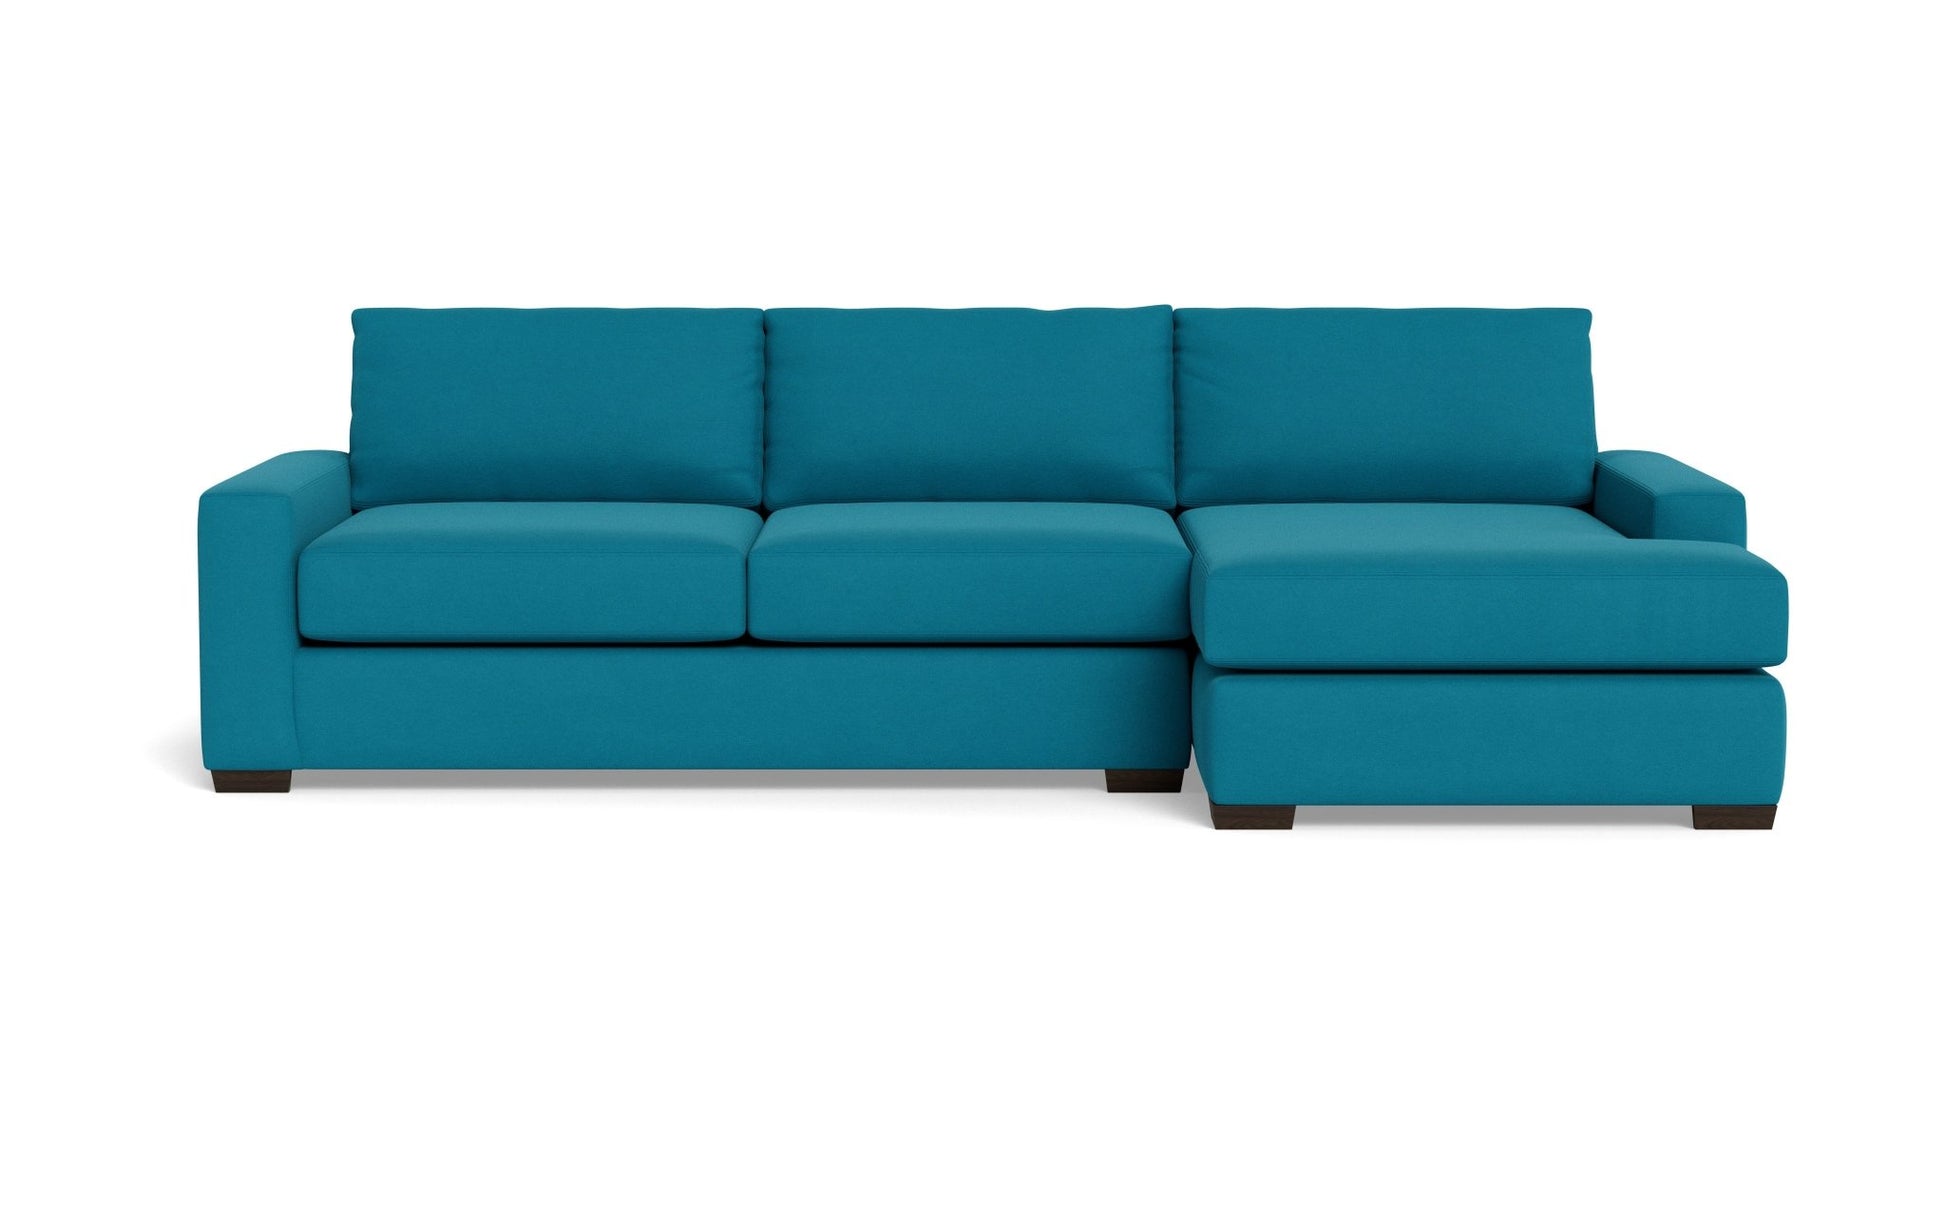 Mas Mesa Right Chaise Sectional - Bella Peacock